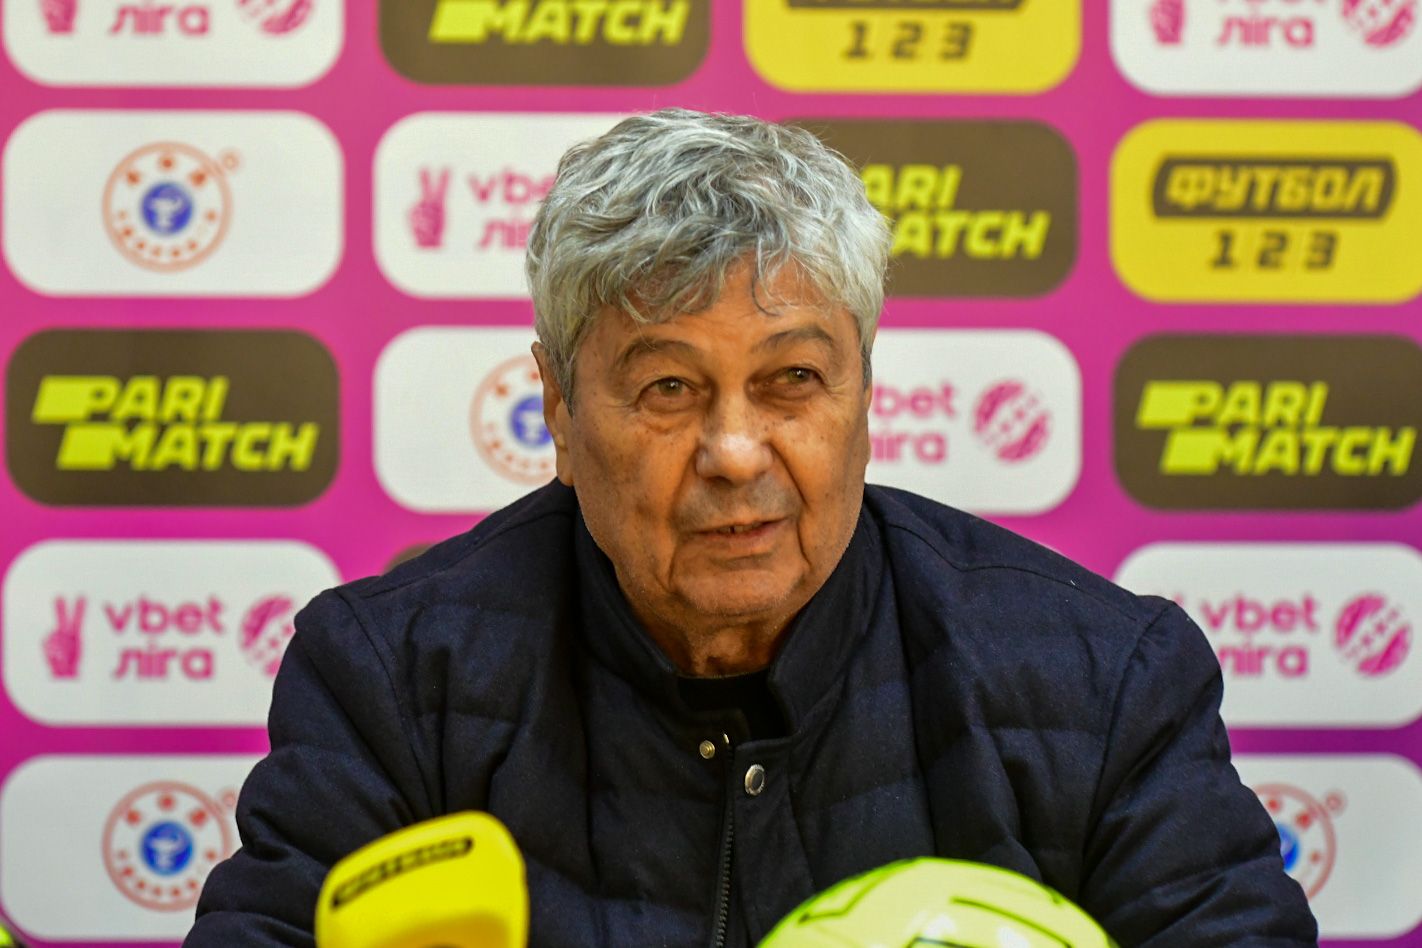 Press conference of Mircea Lucescu after the game against Mariupol